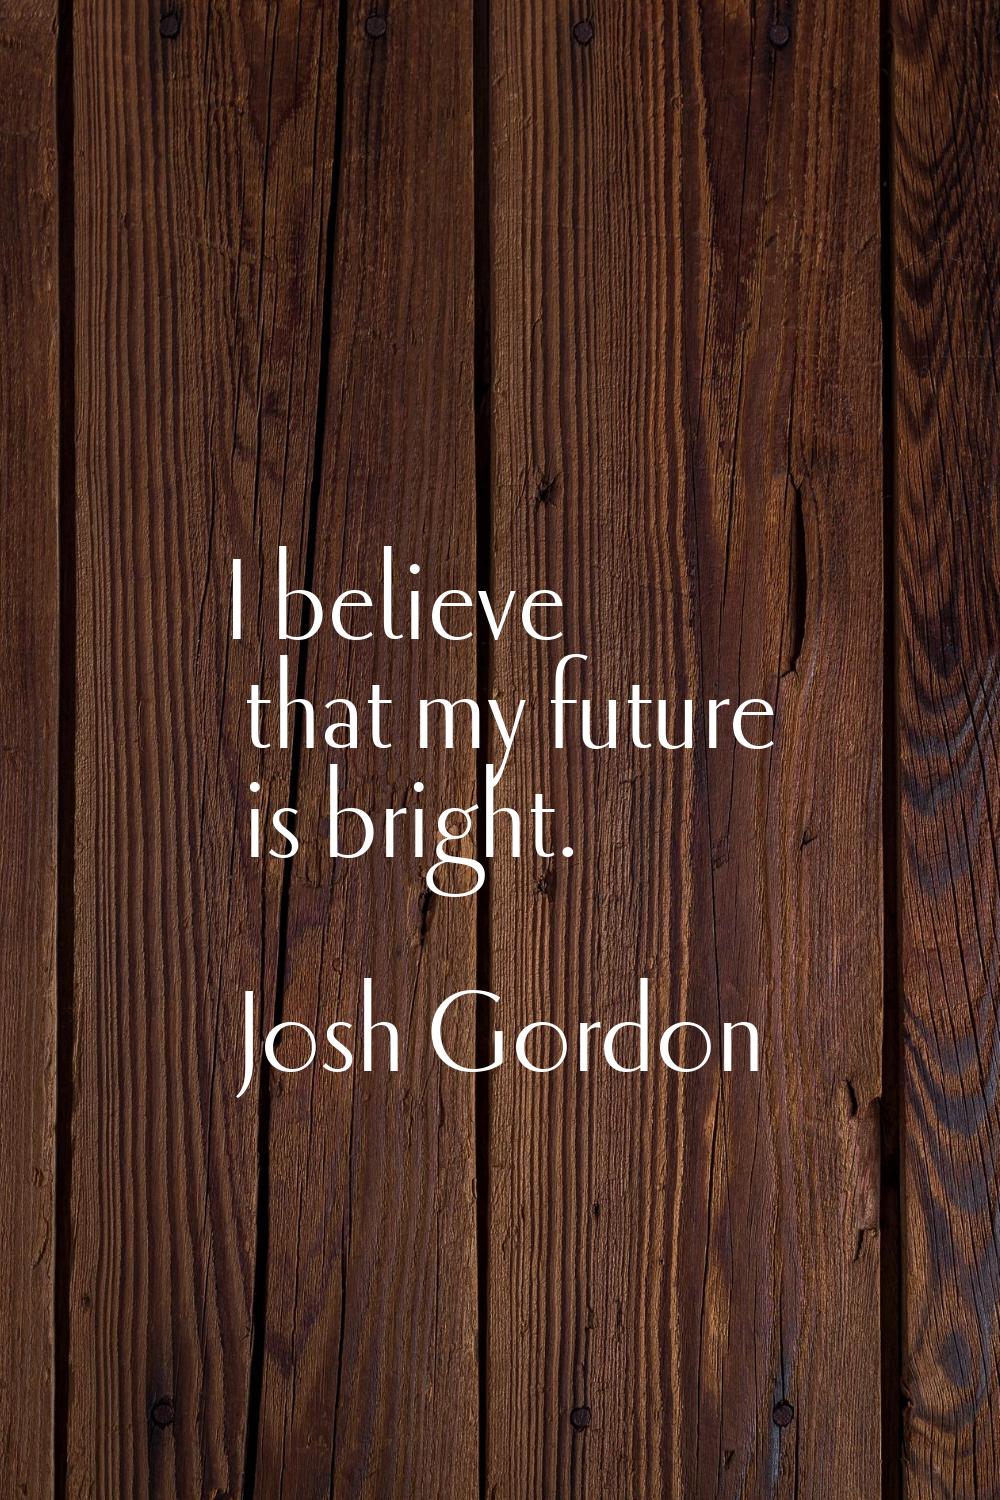 I believe that my future is bright.